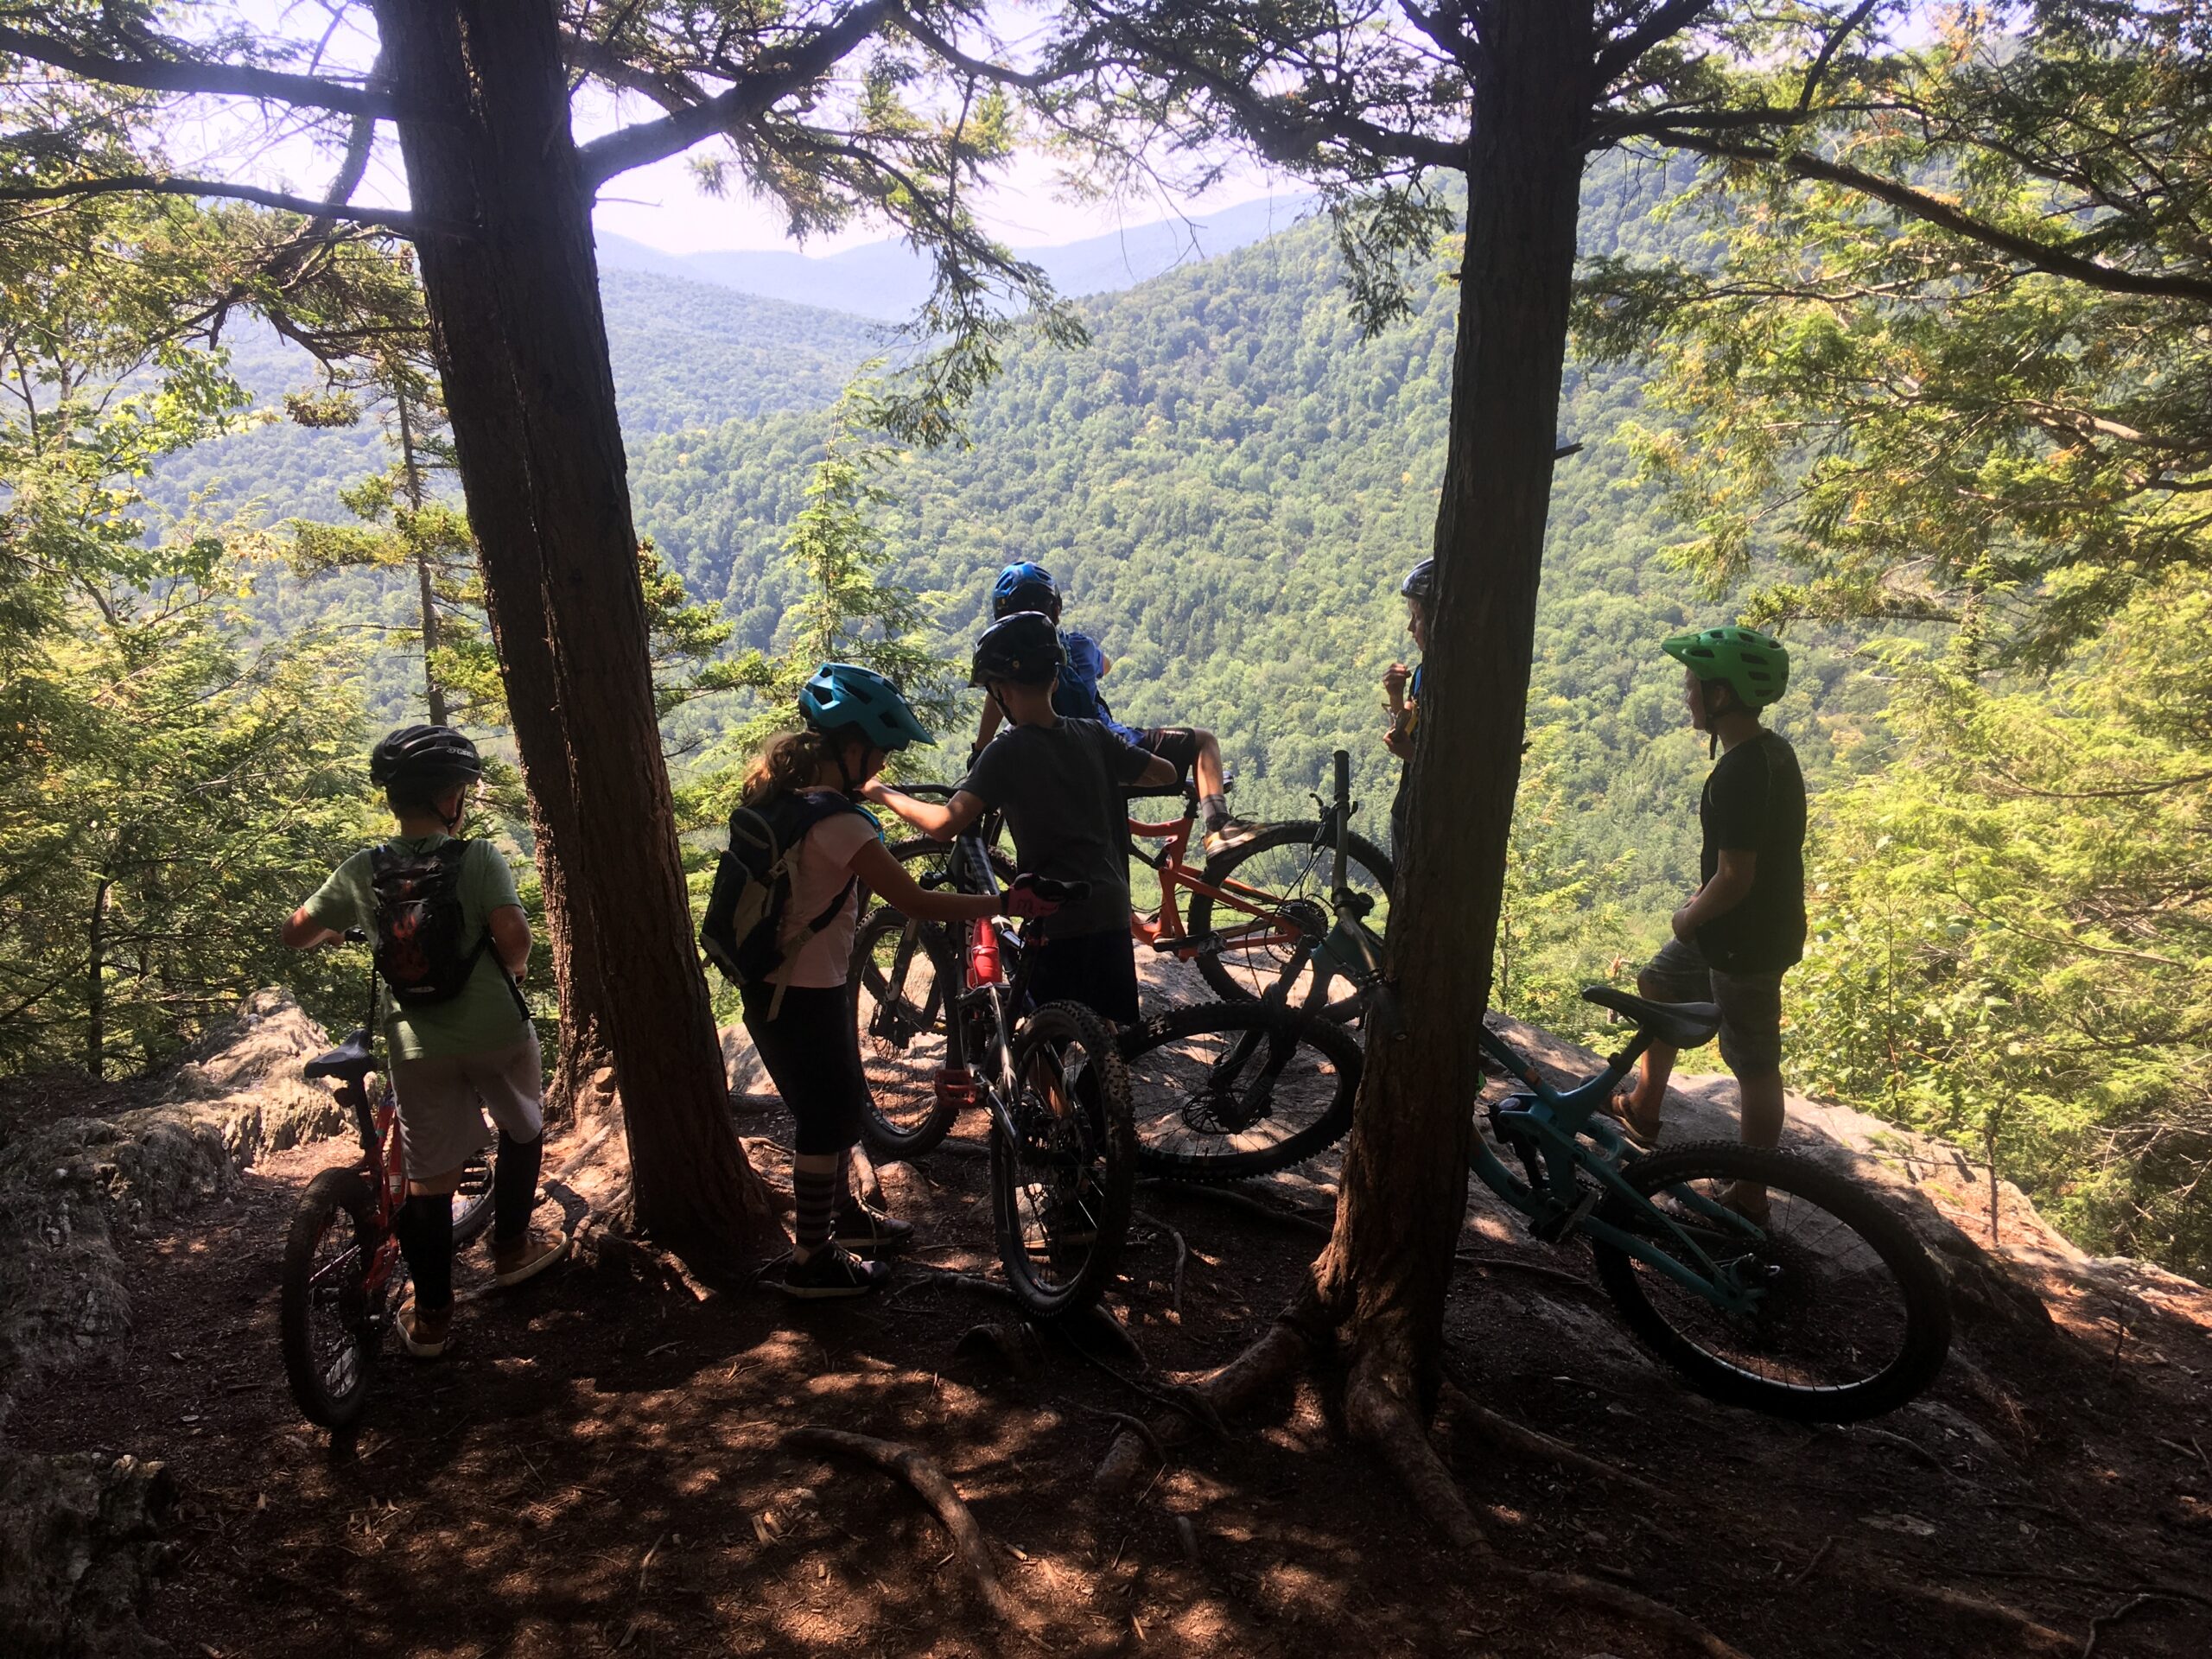 Mud City offers the best Stowe VT Kids' Mountain Bike Camp there is. We'll teach the kids the basics of MTB skills, take them on an easy ride, and gradually elevate the skills over the course of a few days.